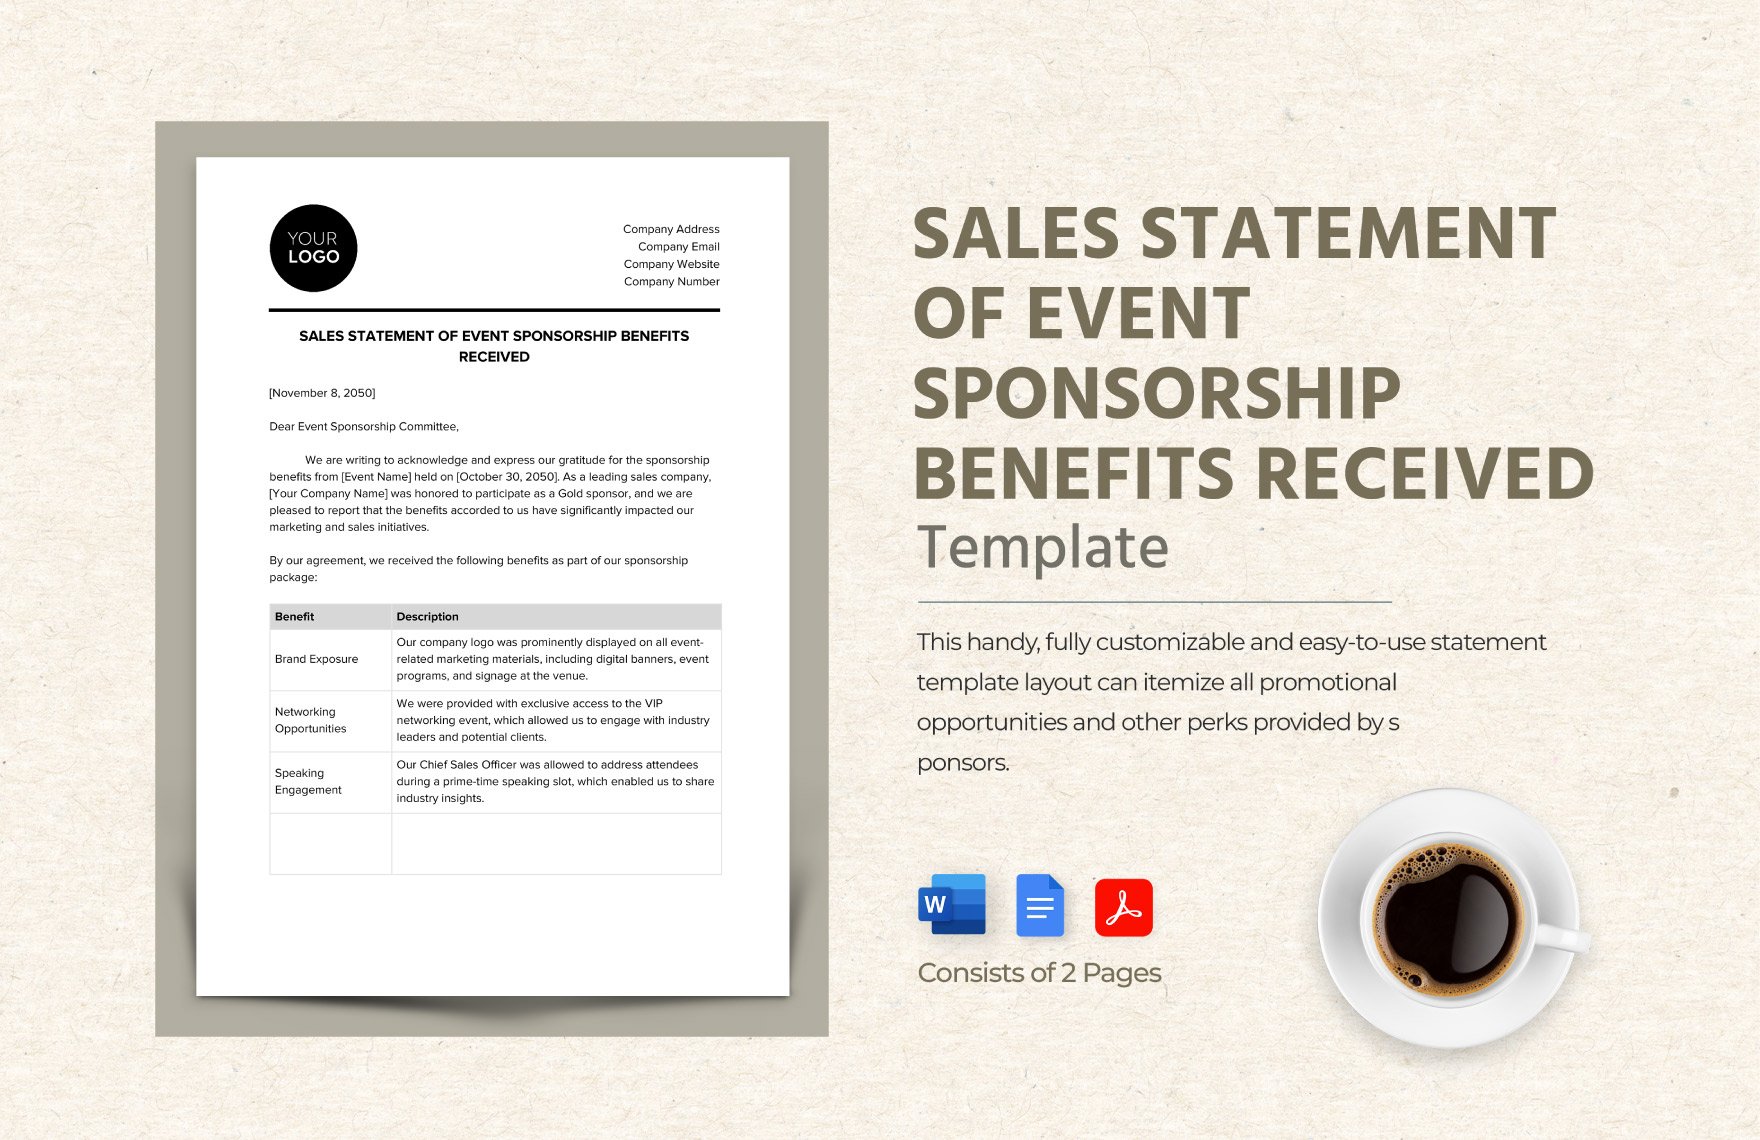 Sales Statement of Event Sponsorship Benefits Received Template